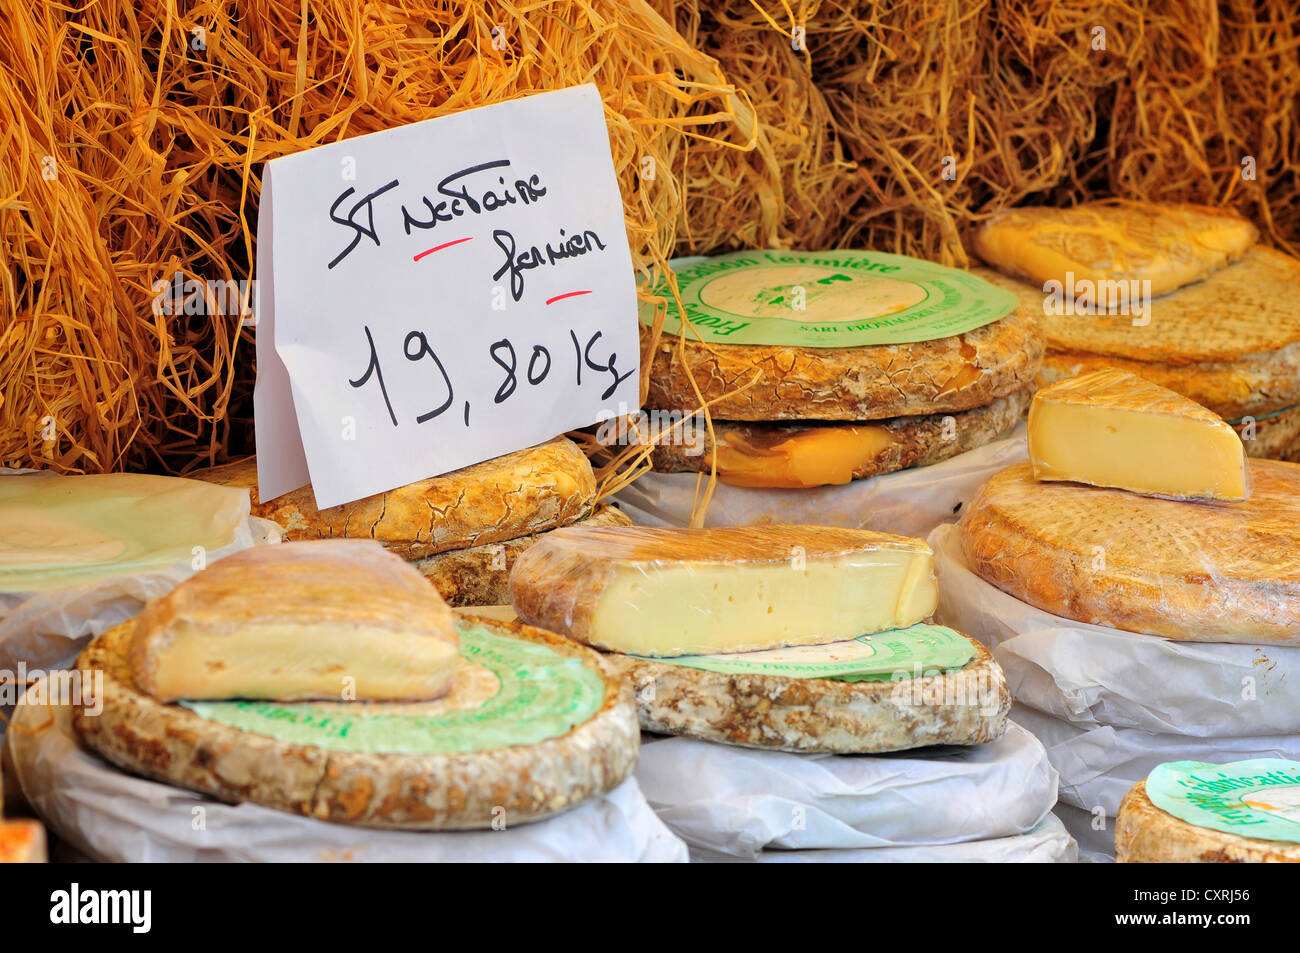 Cheese for sale at a French market in Loches, Loire Valley, France Stock Photo